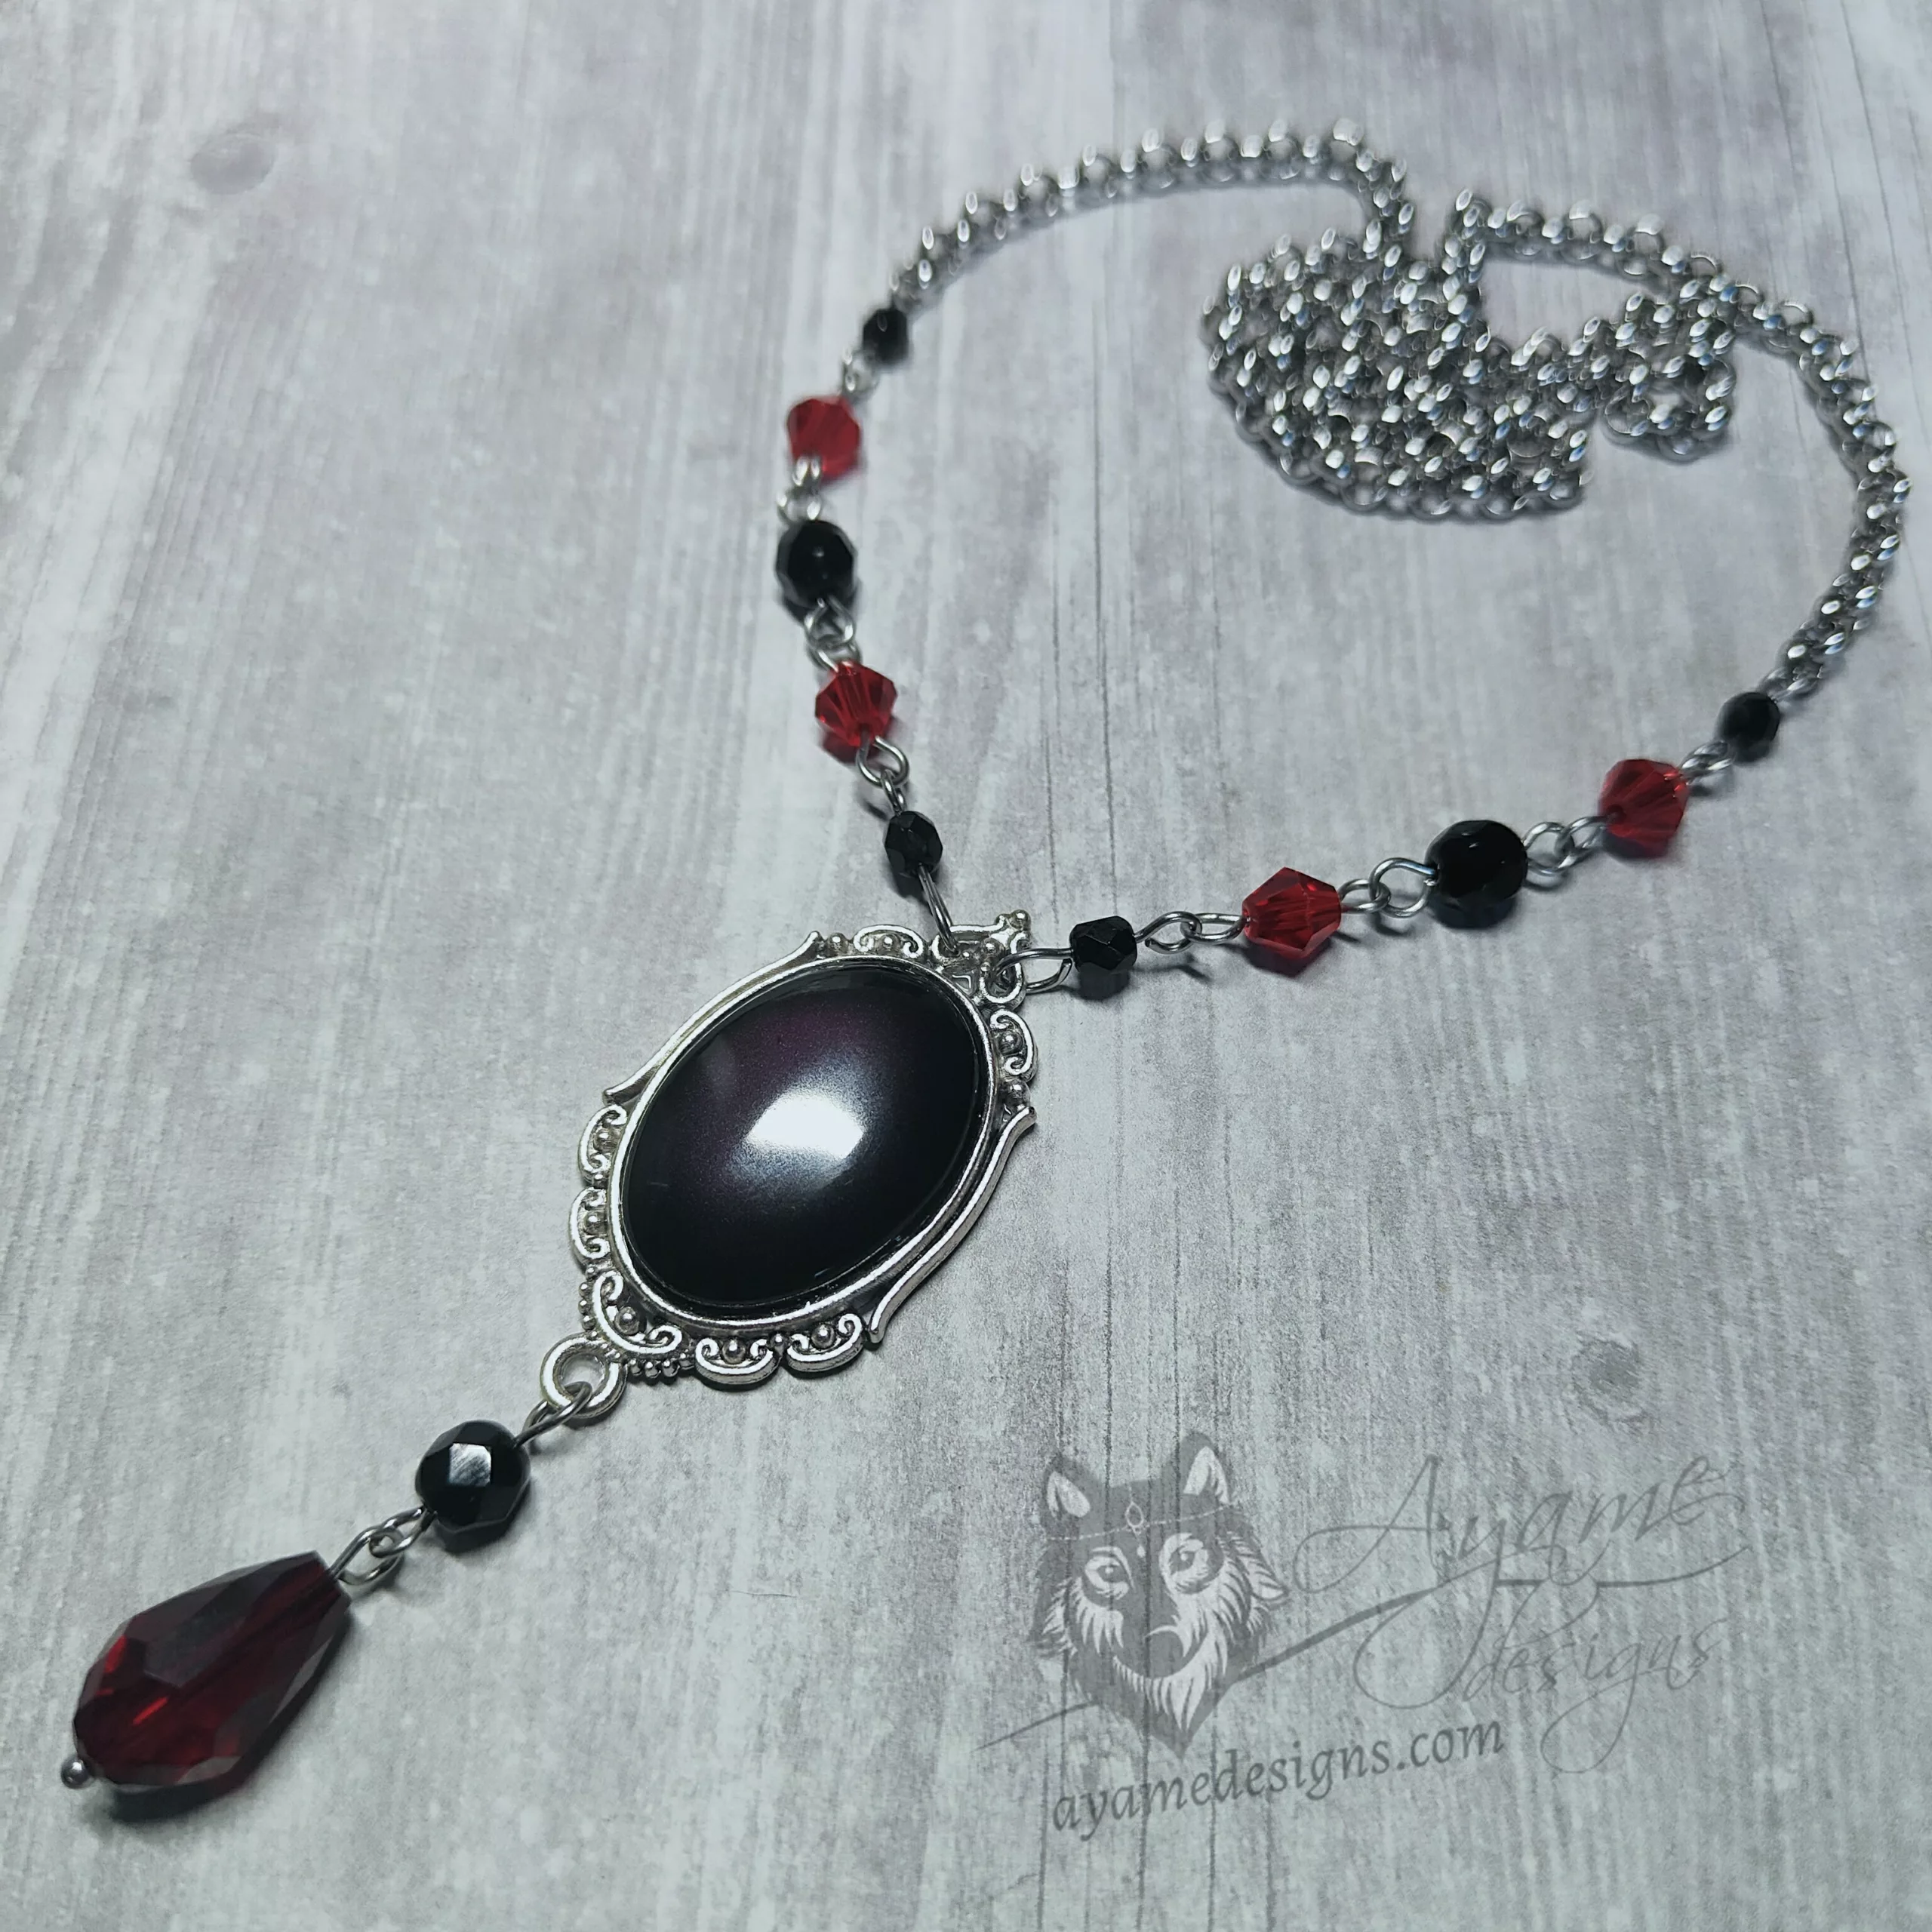 Handmade gothic circlet / head chain with a black resin cameo in a filigree frames, black Czech crystal beads and red Austrian crystal beads